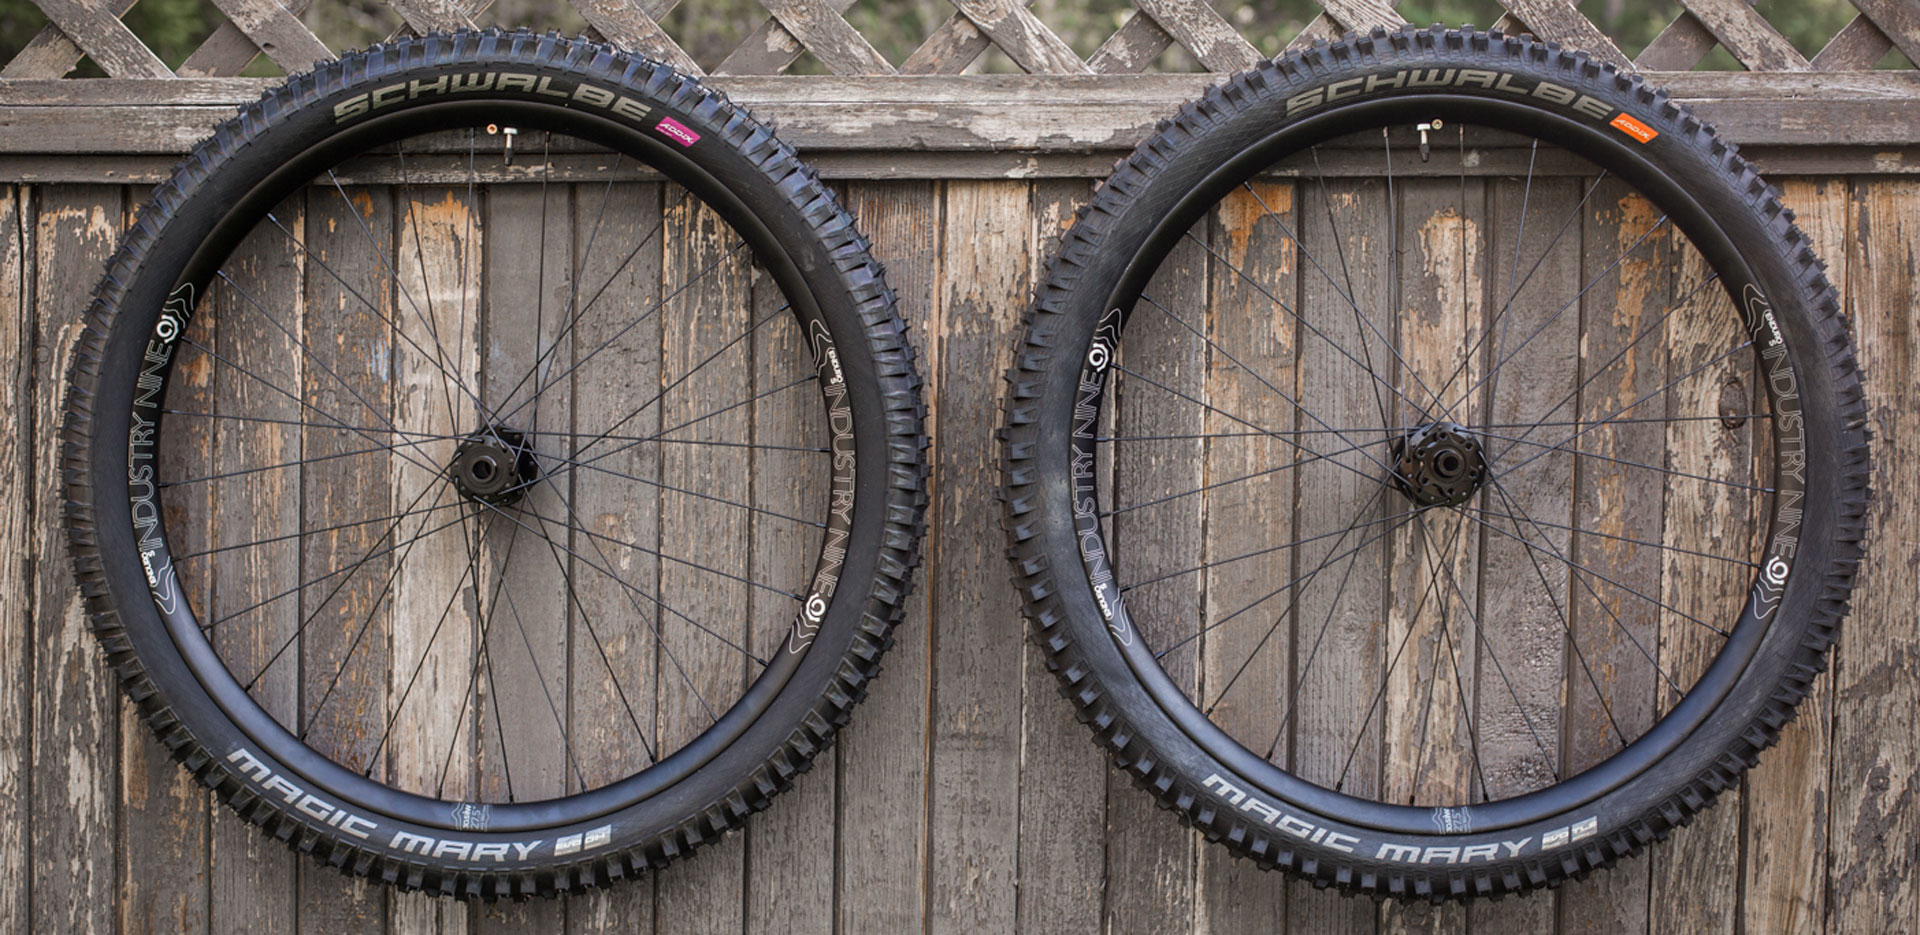 Industry Nine Enduro S 1/1 Wheel Review The Loam Wolf